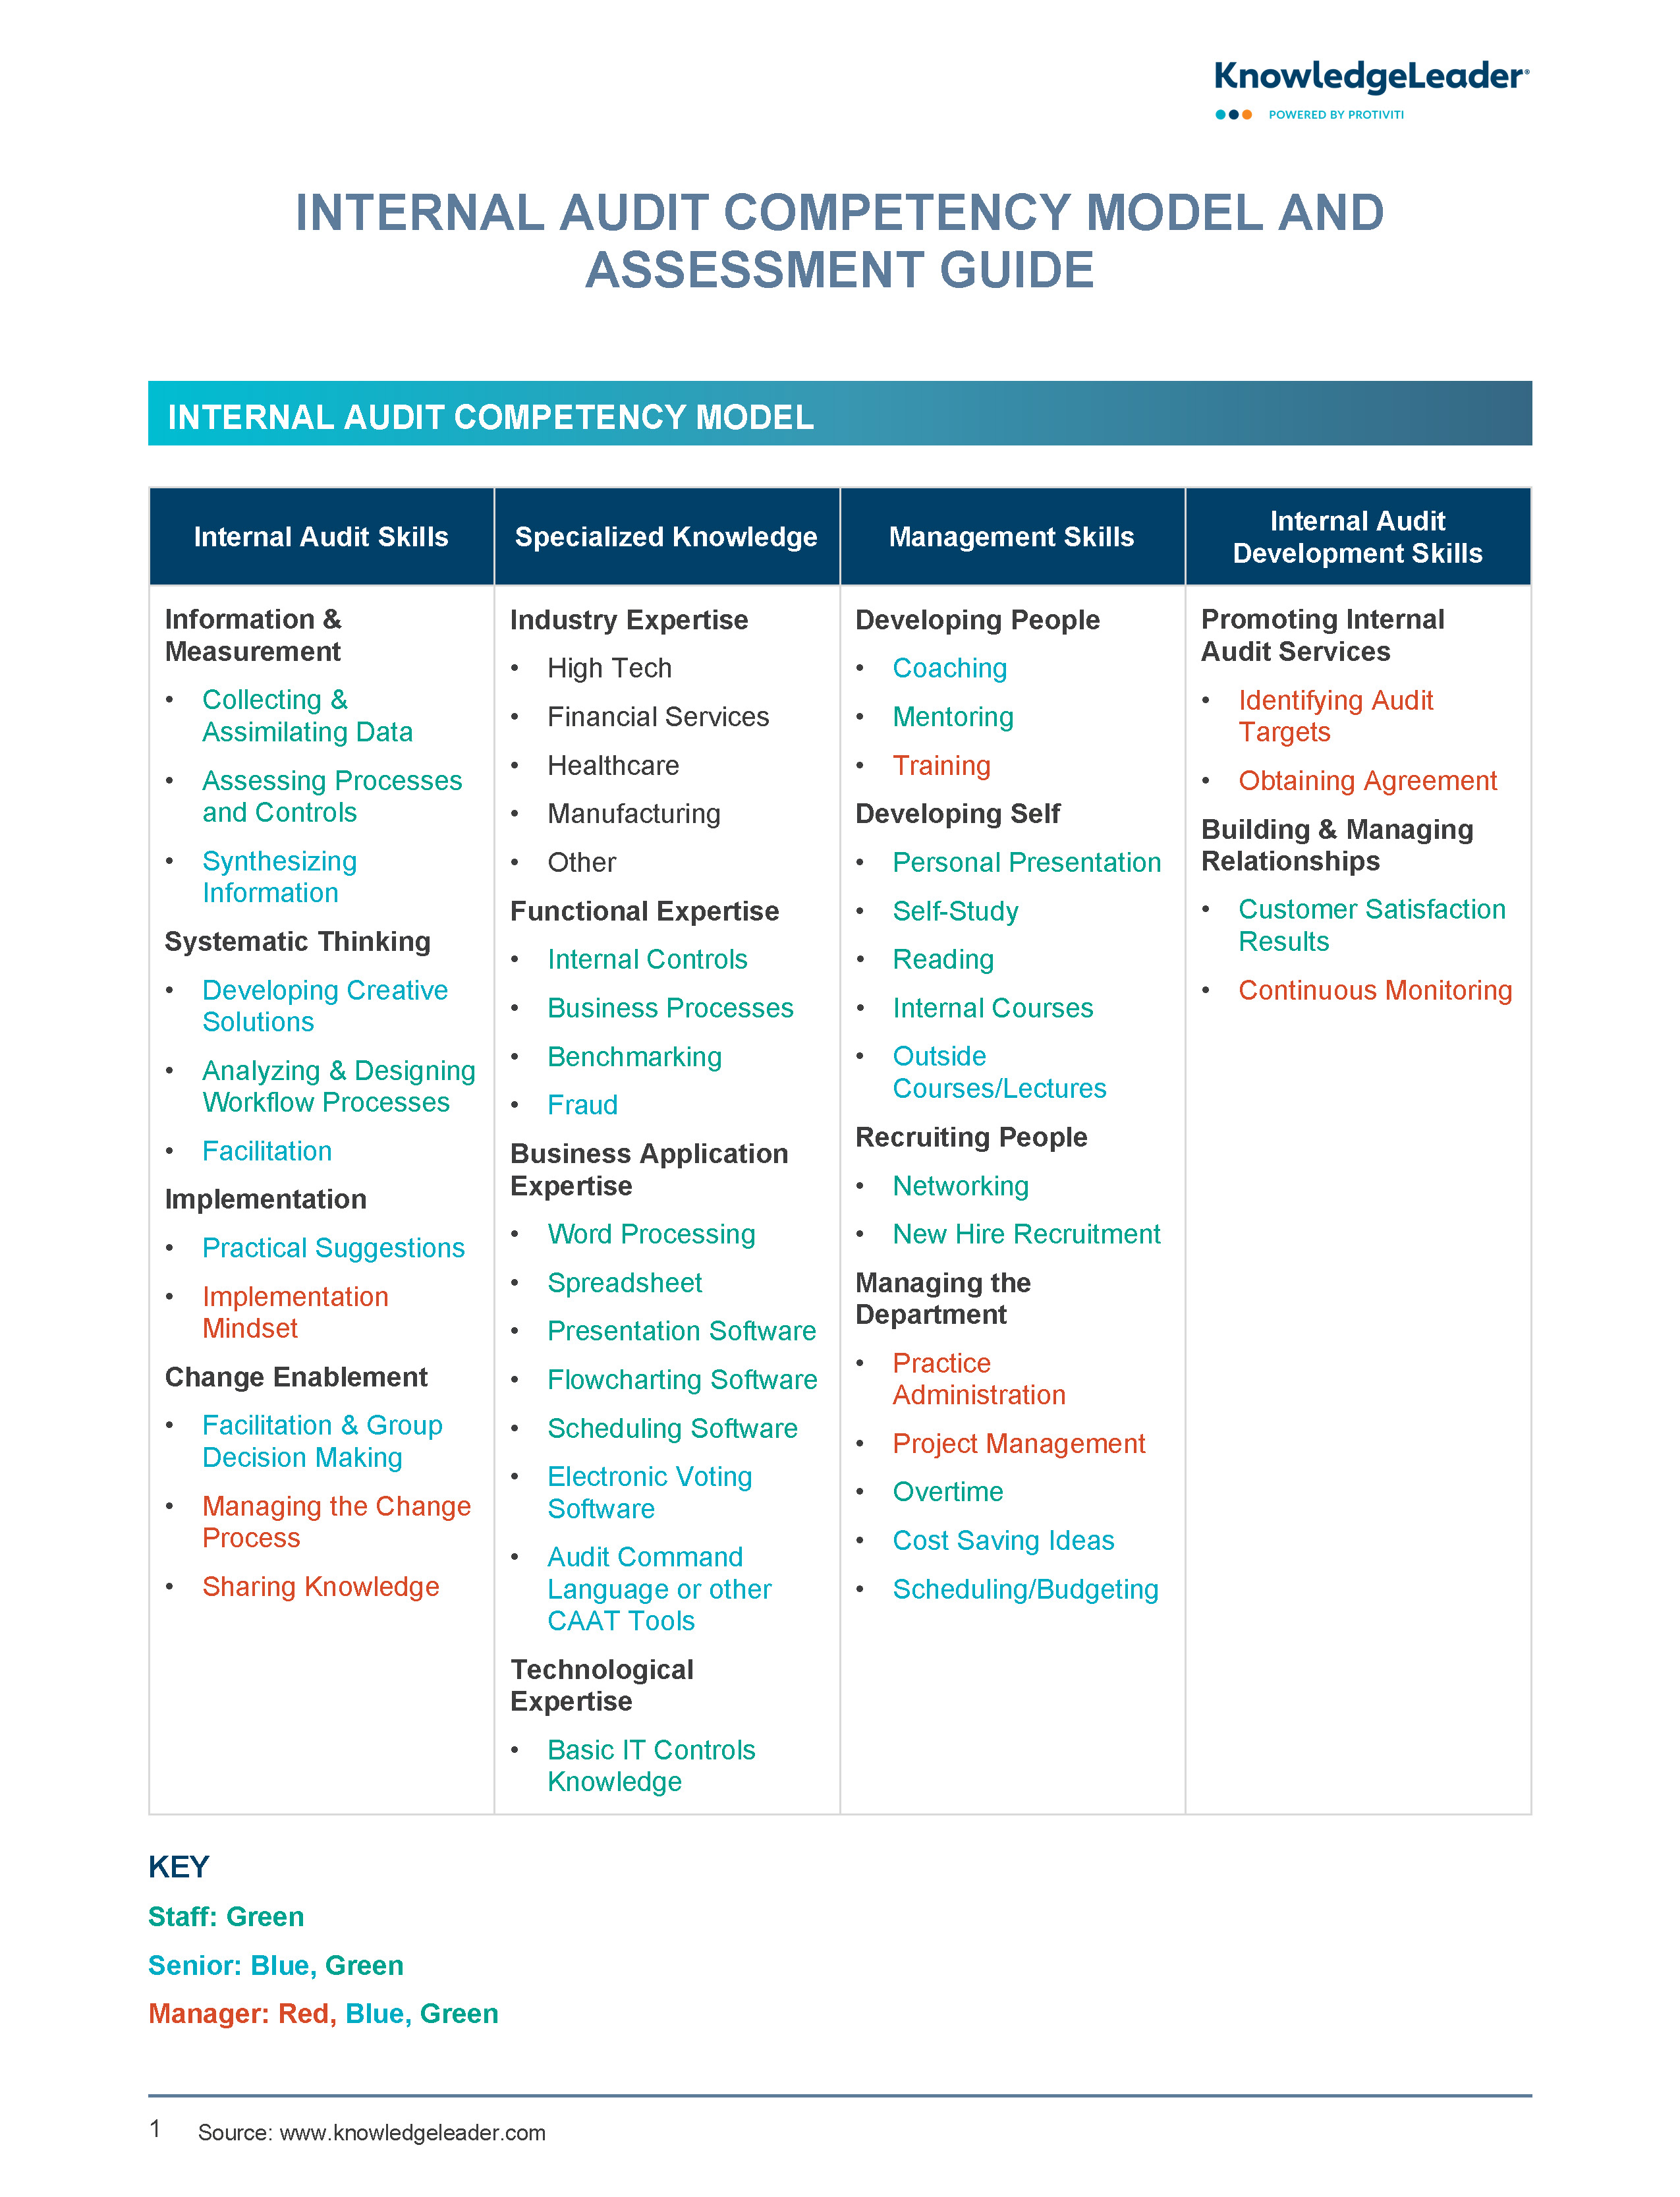 Screenshot of the first page of Internal Audit Competency Model and Assessment Guide